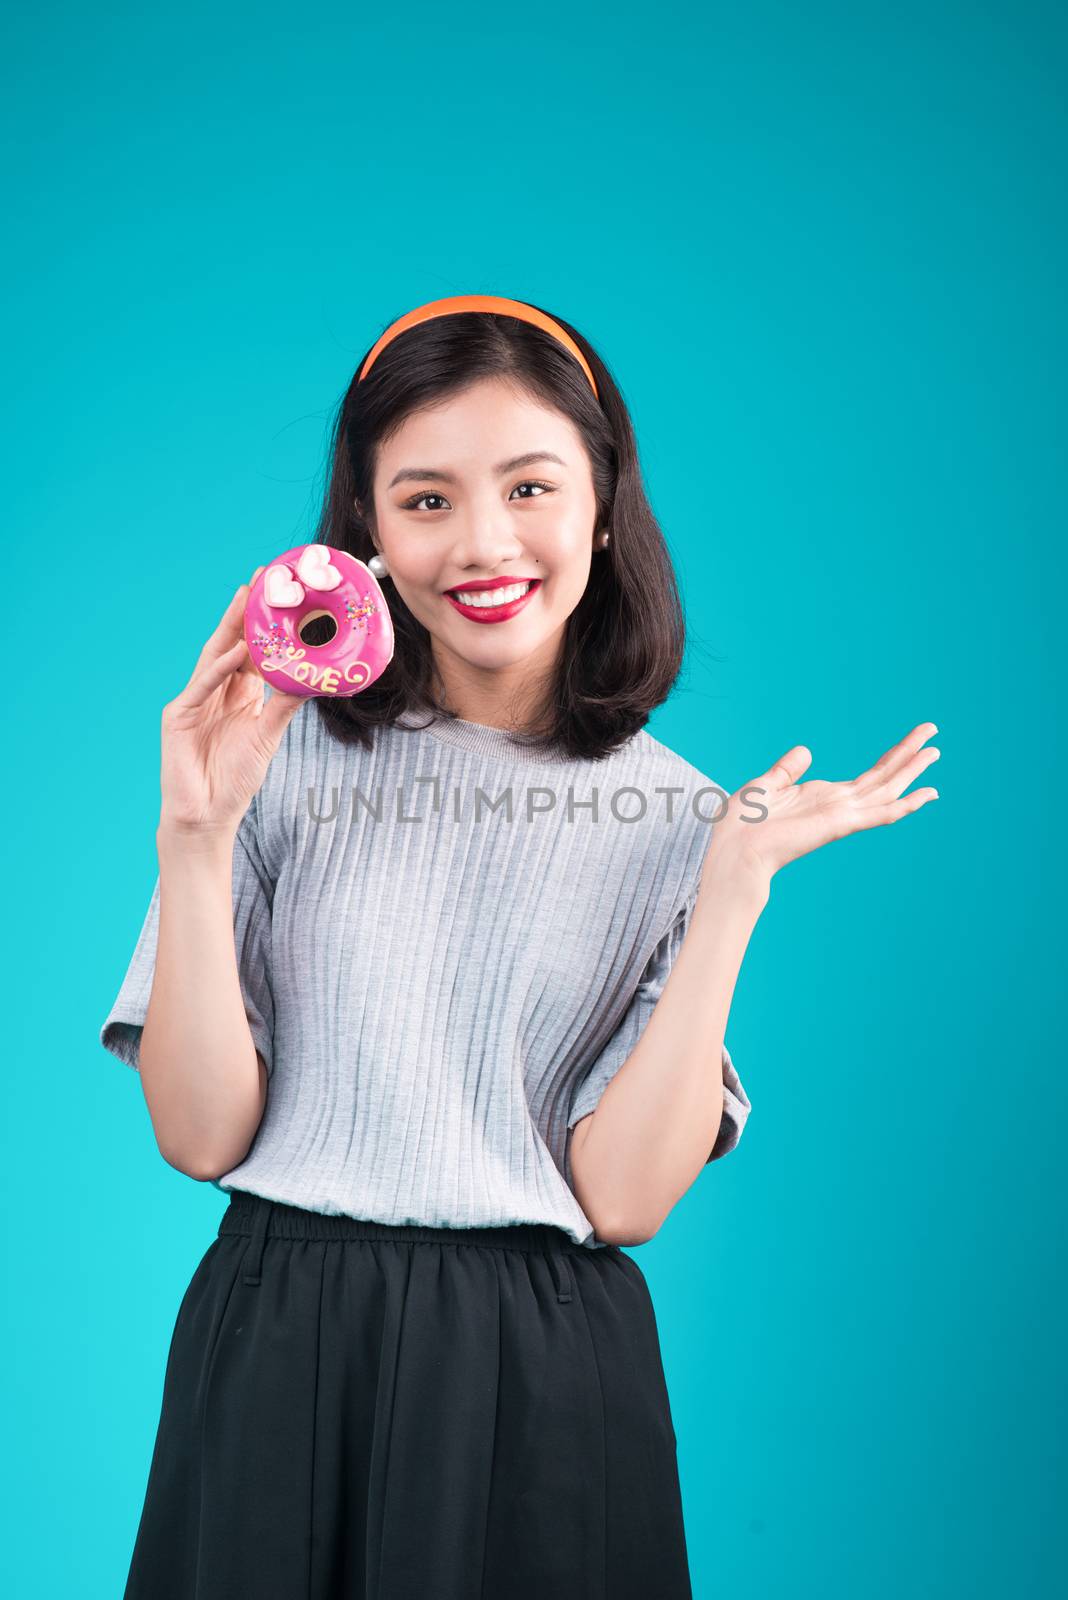 Asian beauty girl holding pink donut. Retro joyful woman with sweets, dessert standing over blue background.